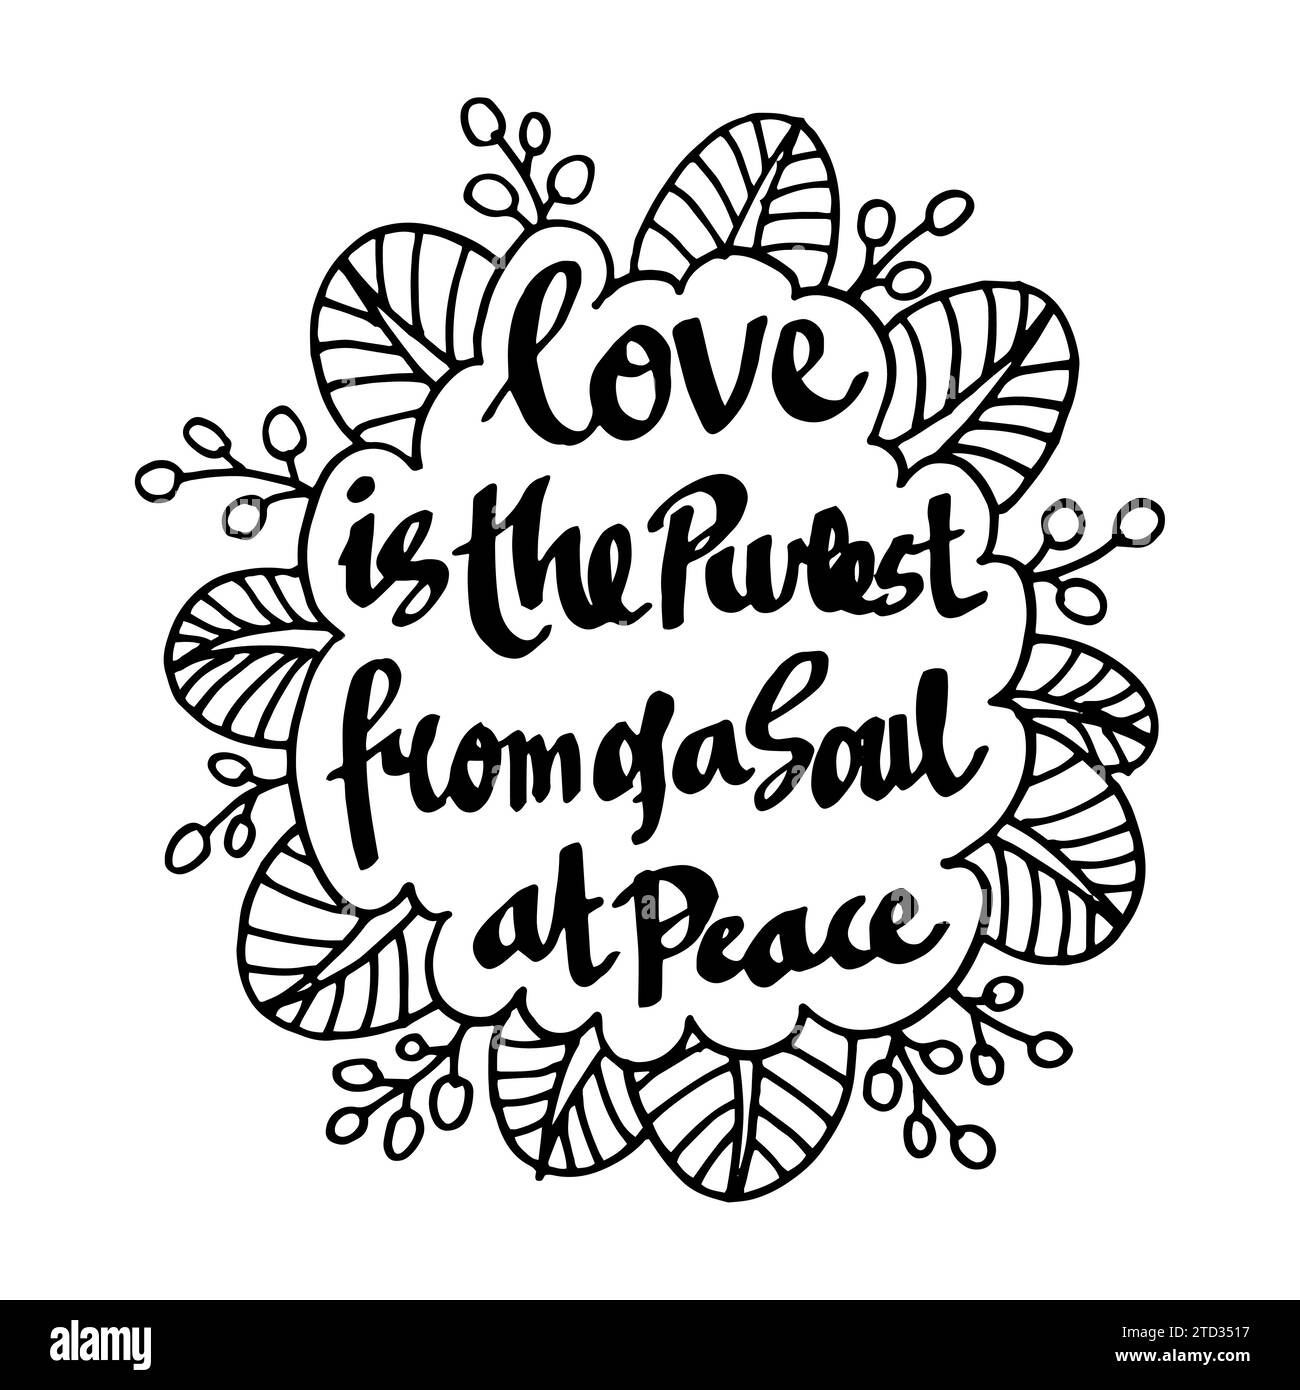 Hand lettering motivational quote of peace illustration  vector Stock Photo